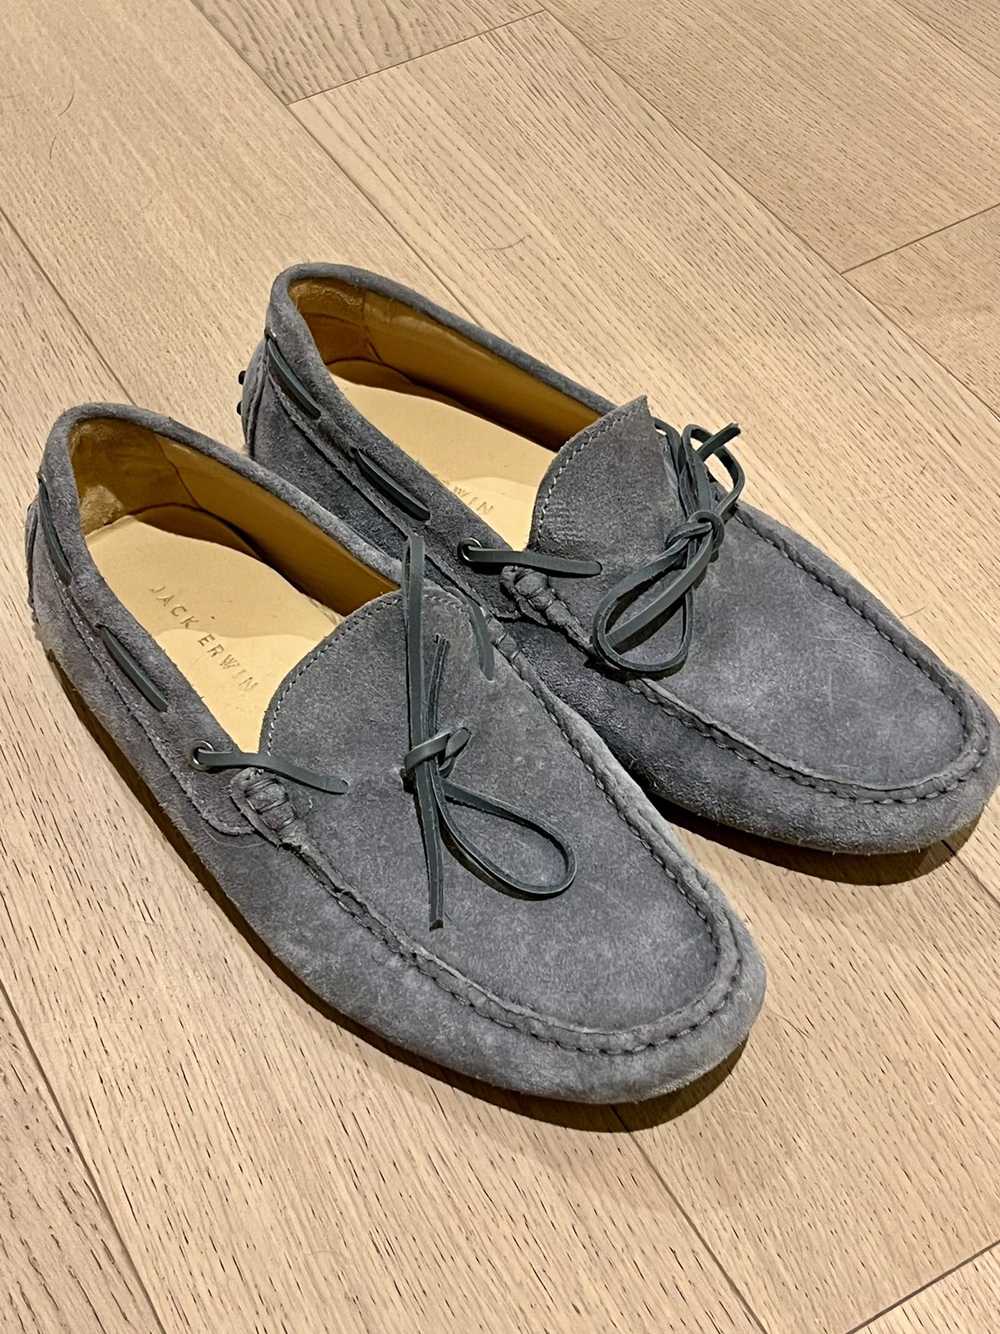 Jack Erwin Blue/Grey Driving Loafers - image 2